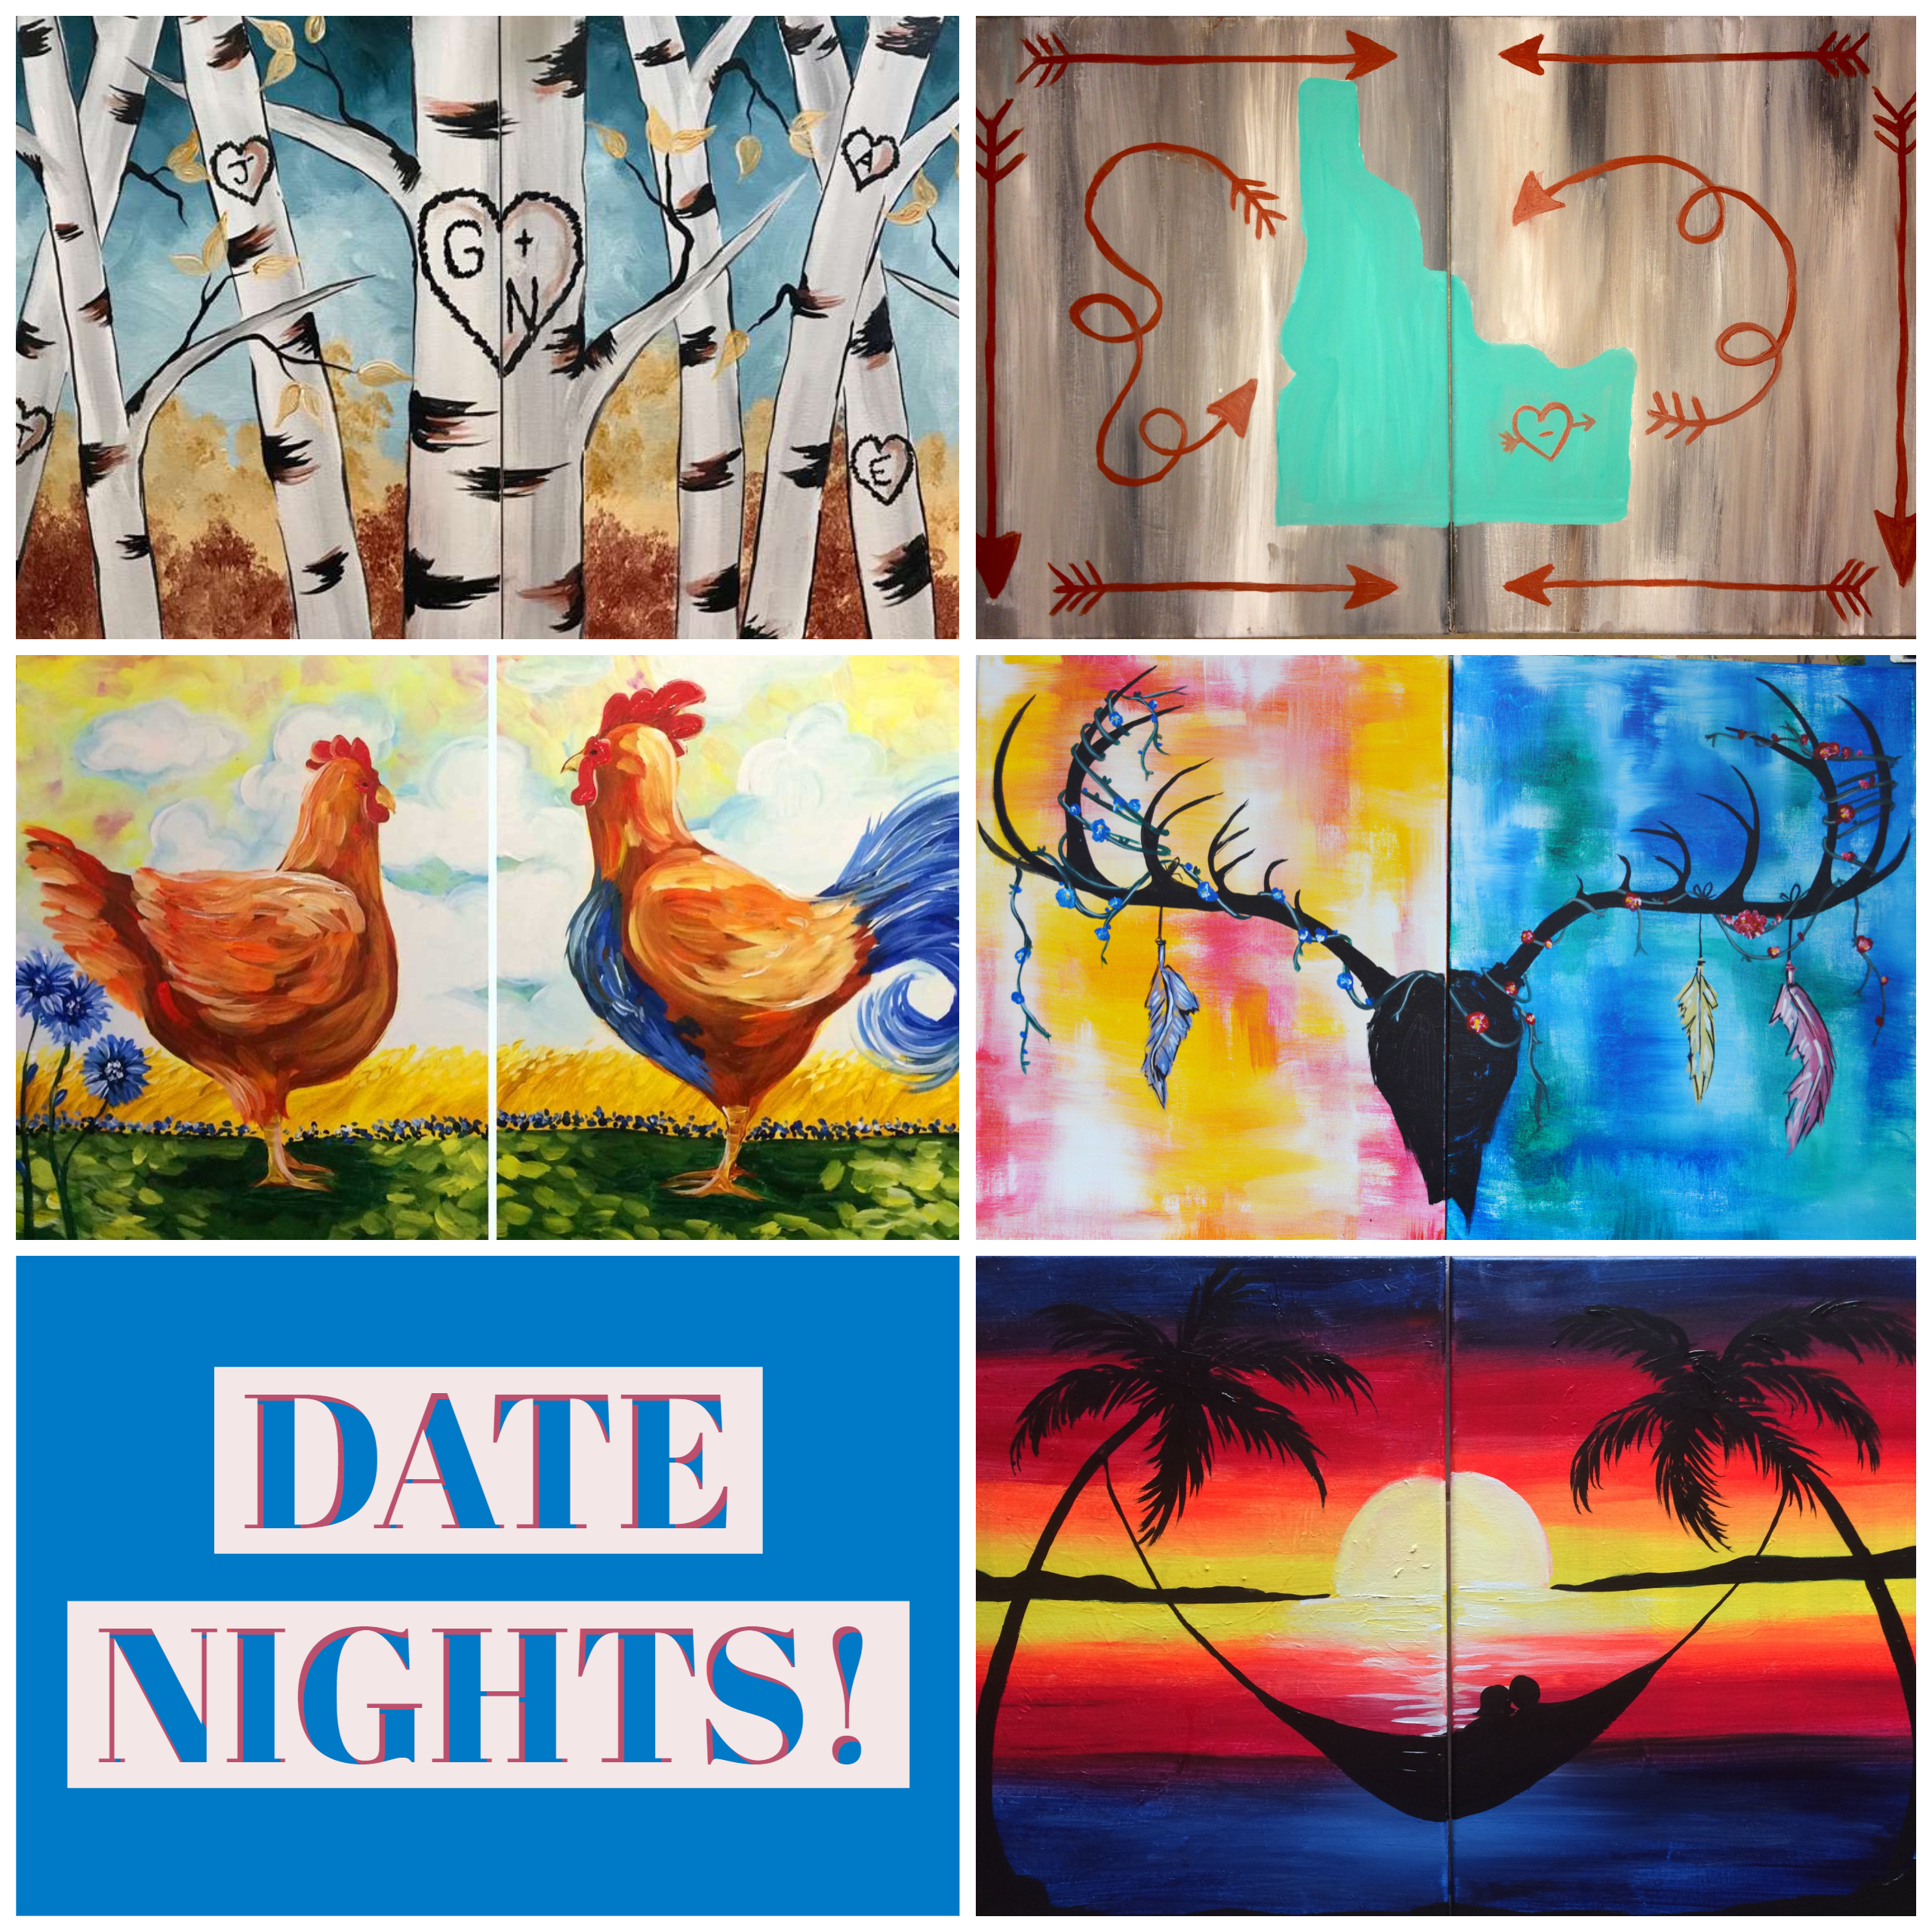 Upcoming Date Nights!